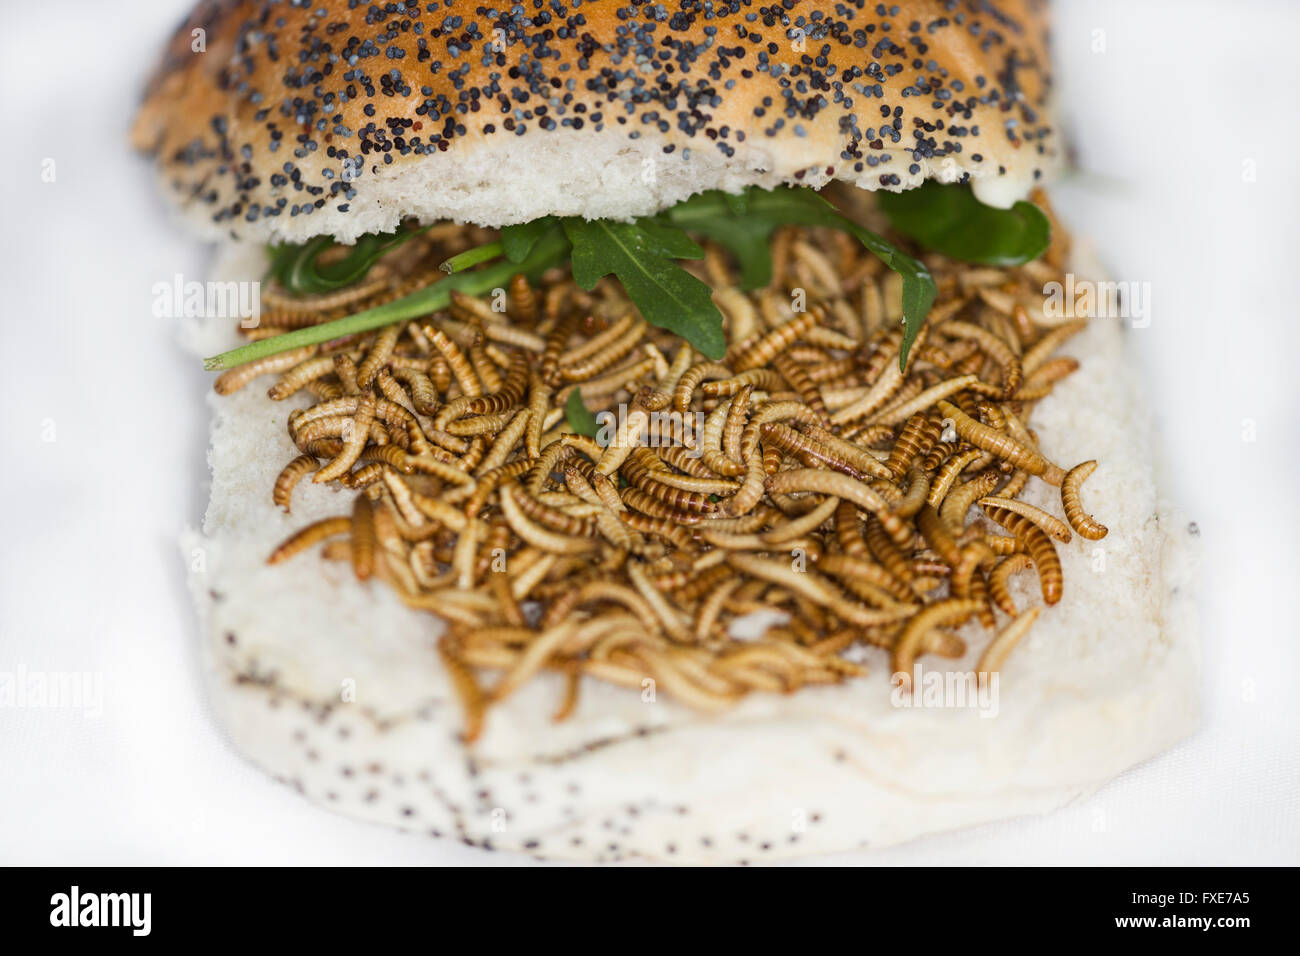 large scale production of edible insects (mealworms) in Holland Stock Photo